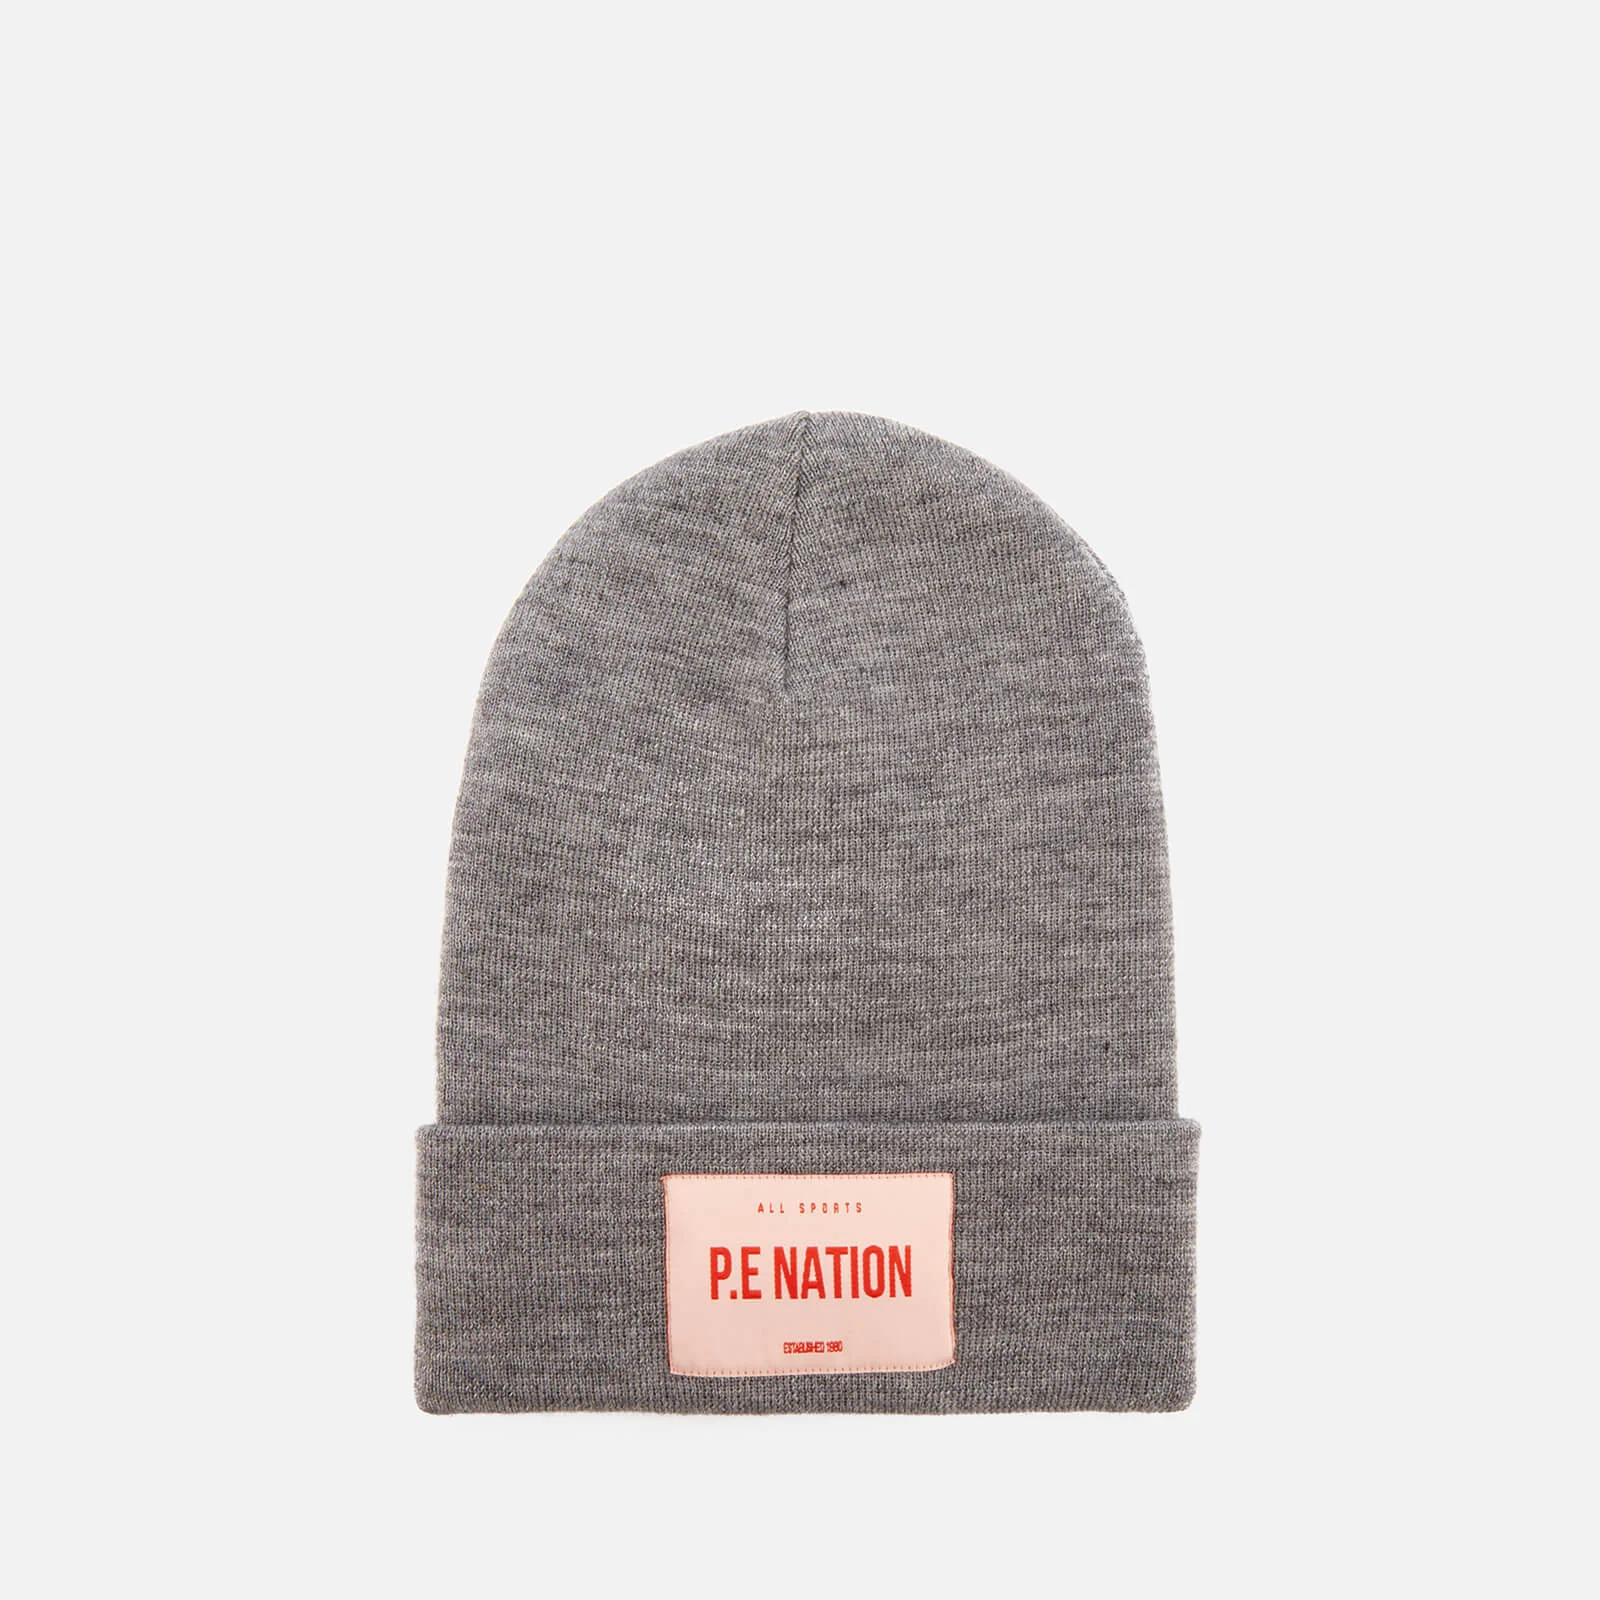 P.E Nation Women's The Kayo Woolmark Collection Beanie Hat - Grey Marl Image 1